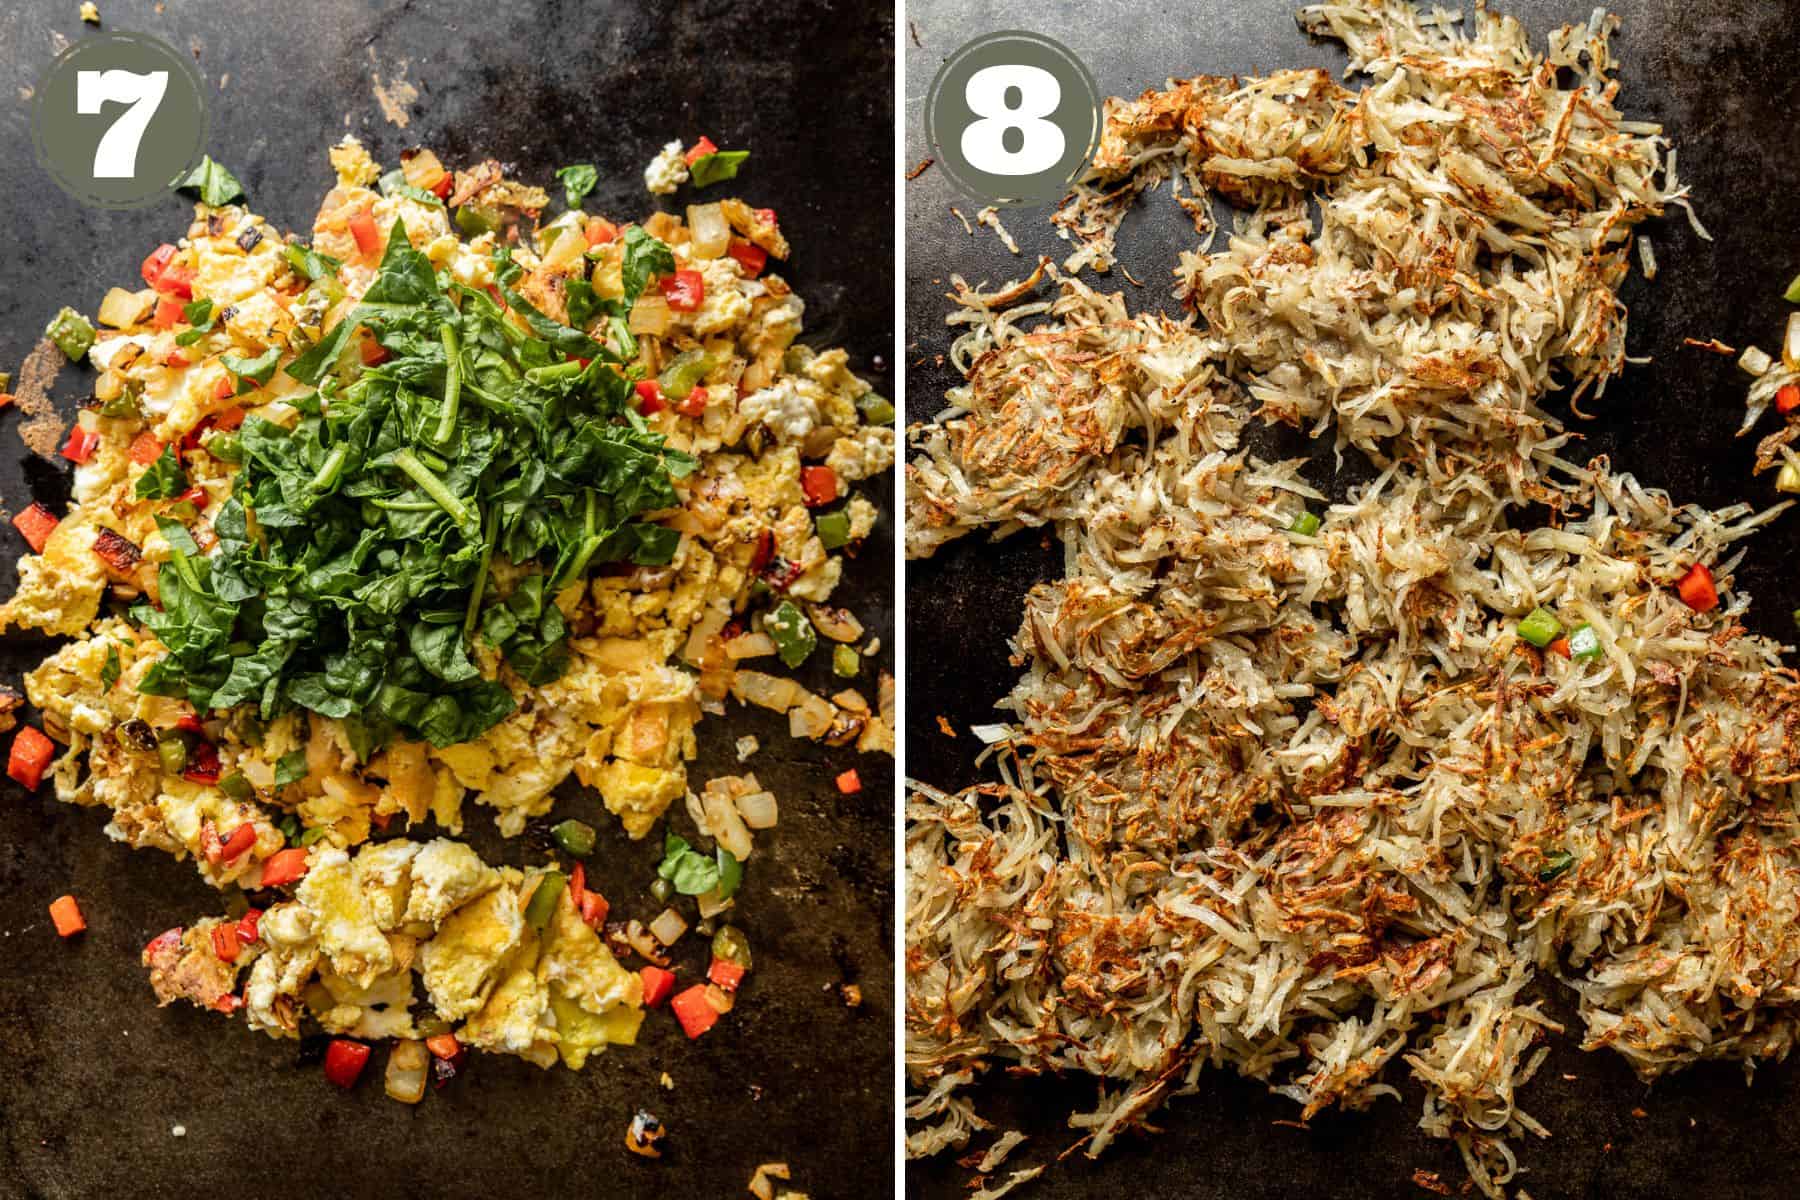 Side by side photos showing scrambled eggs mixed with veggies and crispy hashbrowns on the griddle.